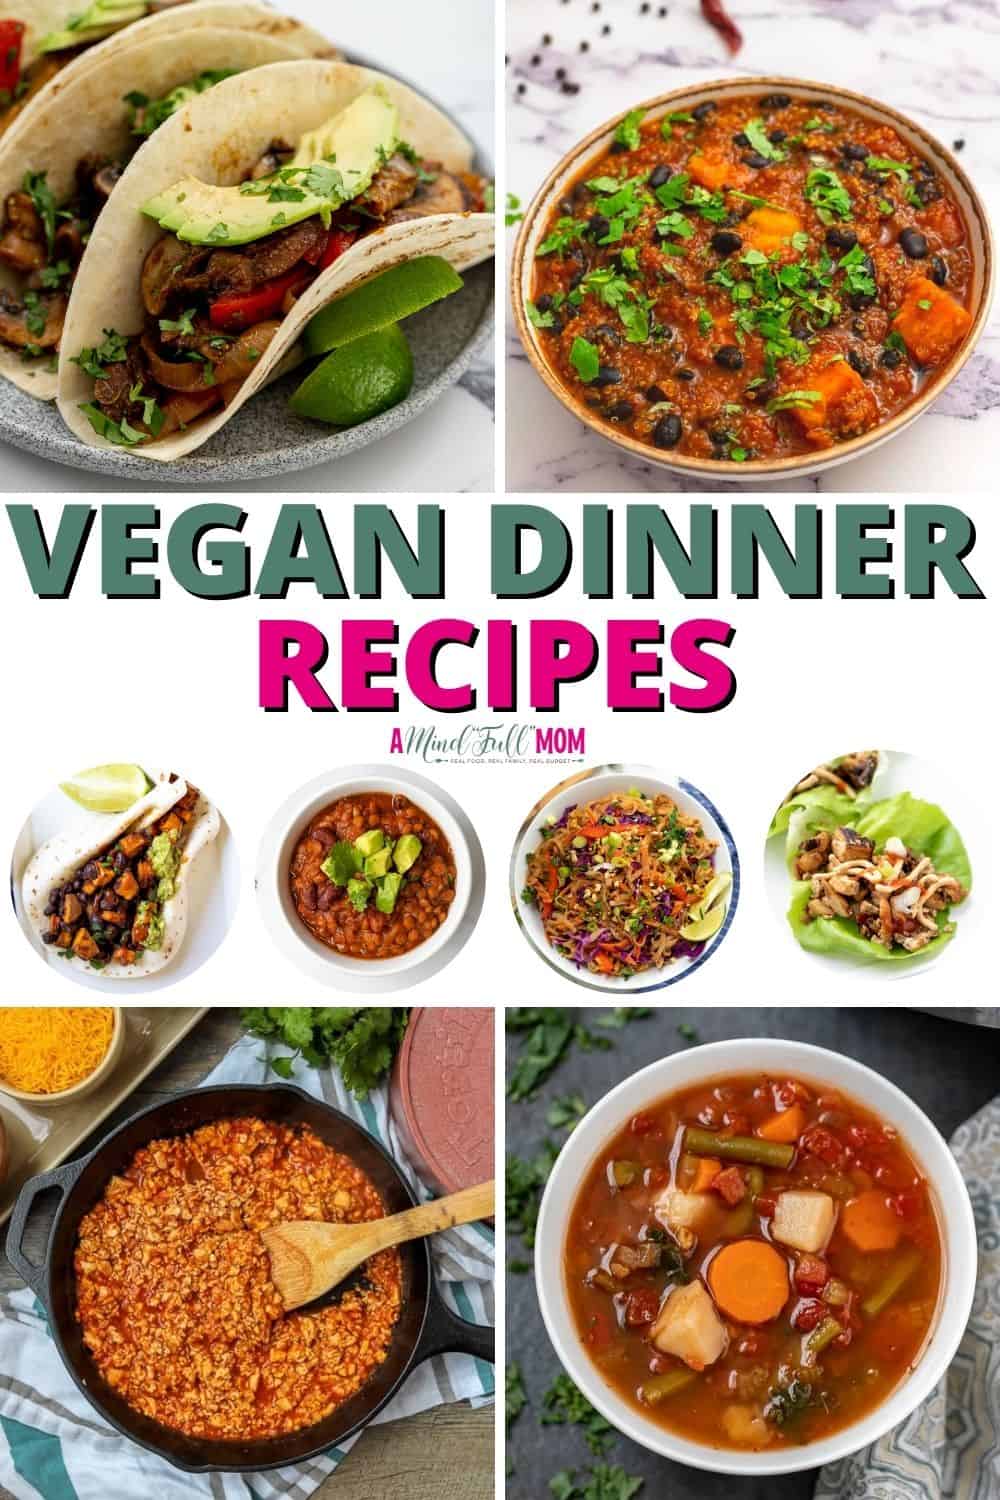 These easy plant-based recipes prove that vegan dinners can and should be affordable, satisfying, flavorful, and easy to make.